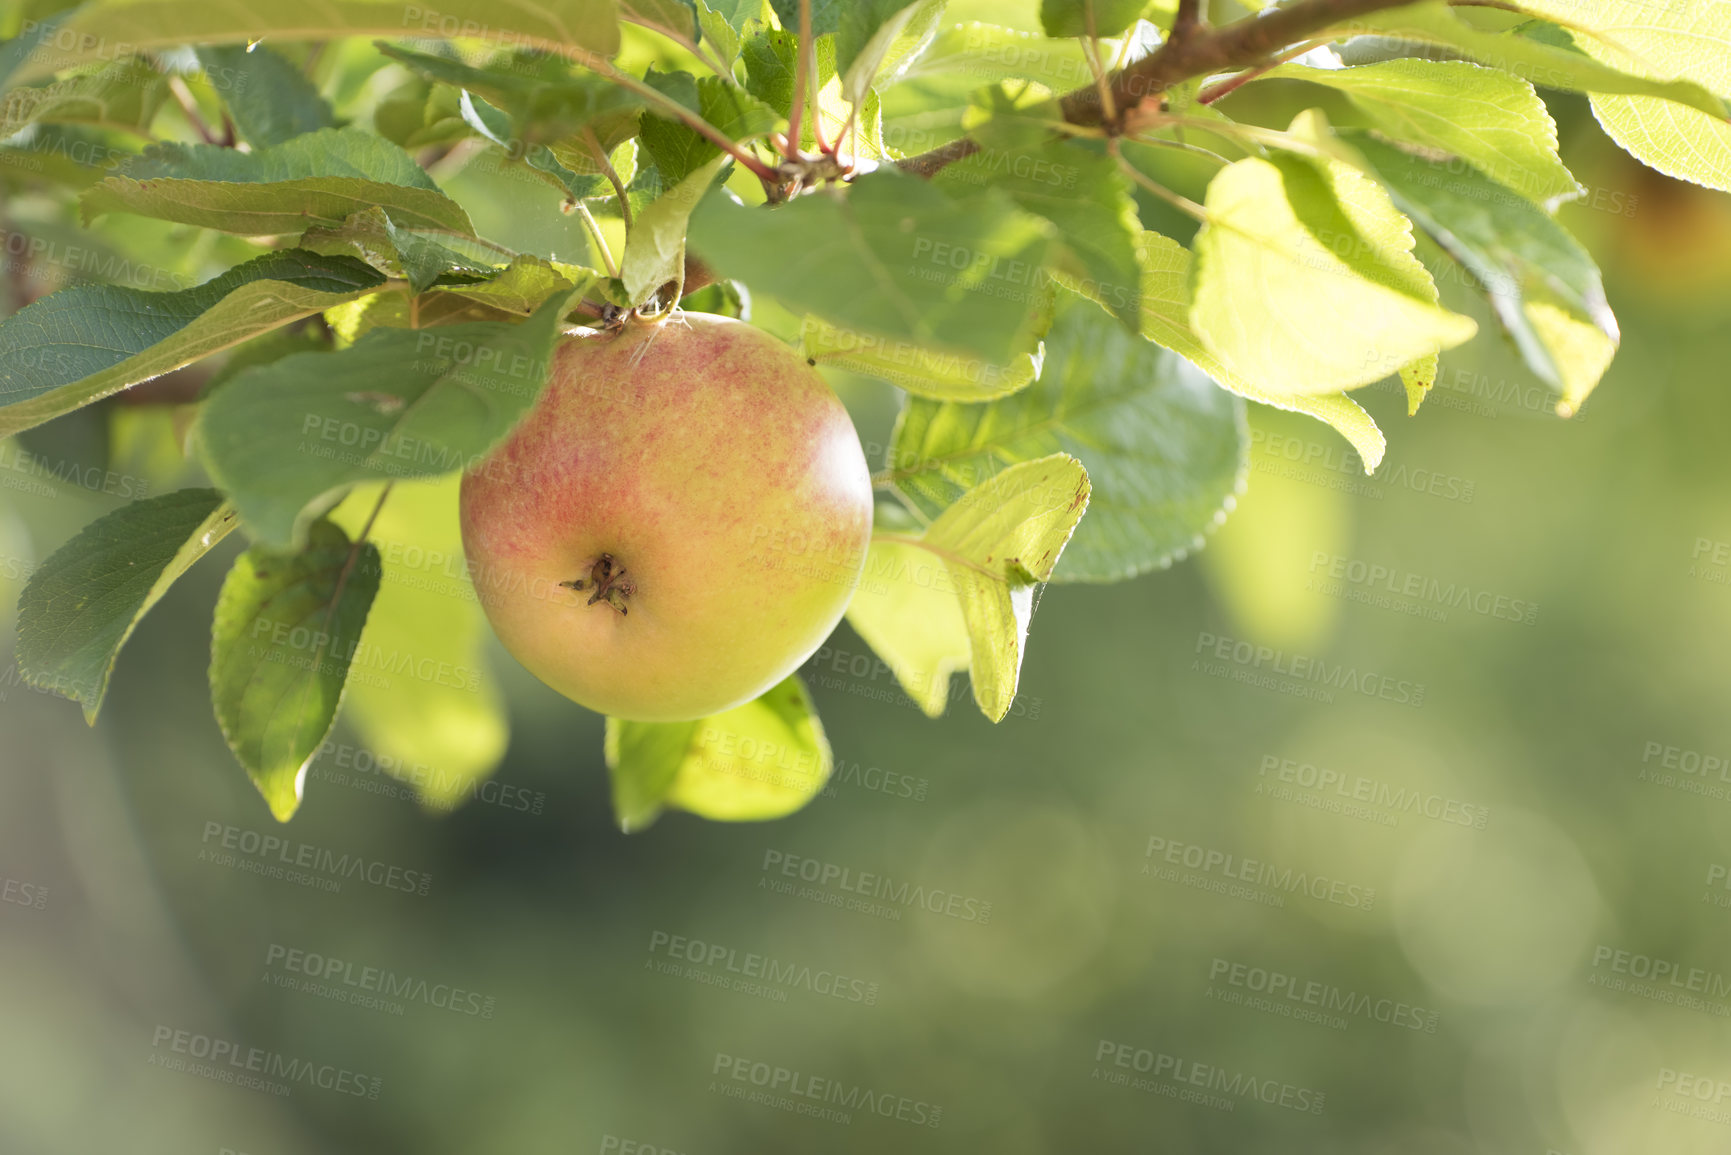 Buy stock photo A juicy apple growing on a tree in an orchard outdoors with copyspace. Delicious ripe fruit ready to pick for harvest on a branch. Pure organic produce being cultivated in a natural environment